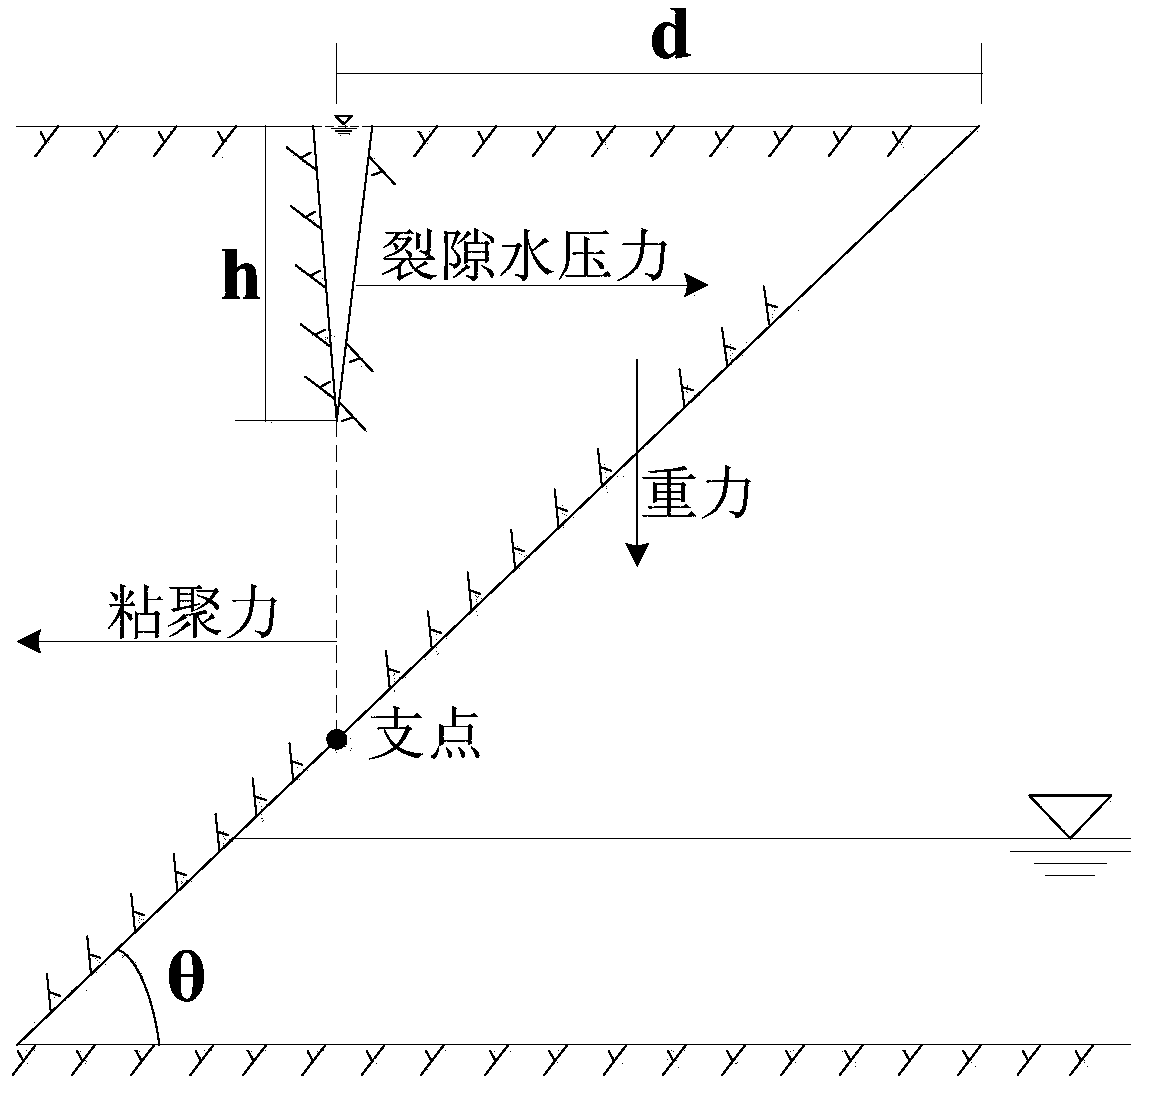 A Numerical Simulation Method of Soil Collapse Based on the Principle of Mechanical Balance